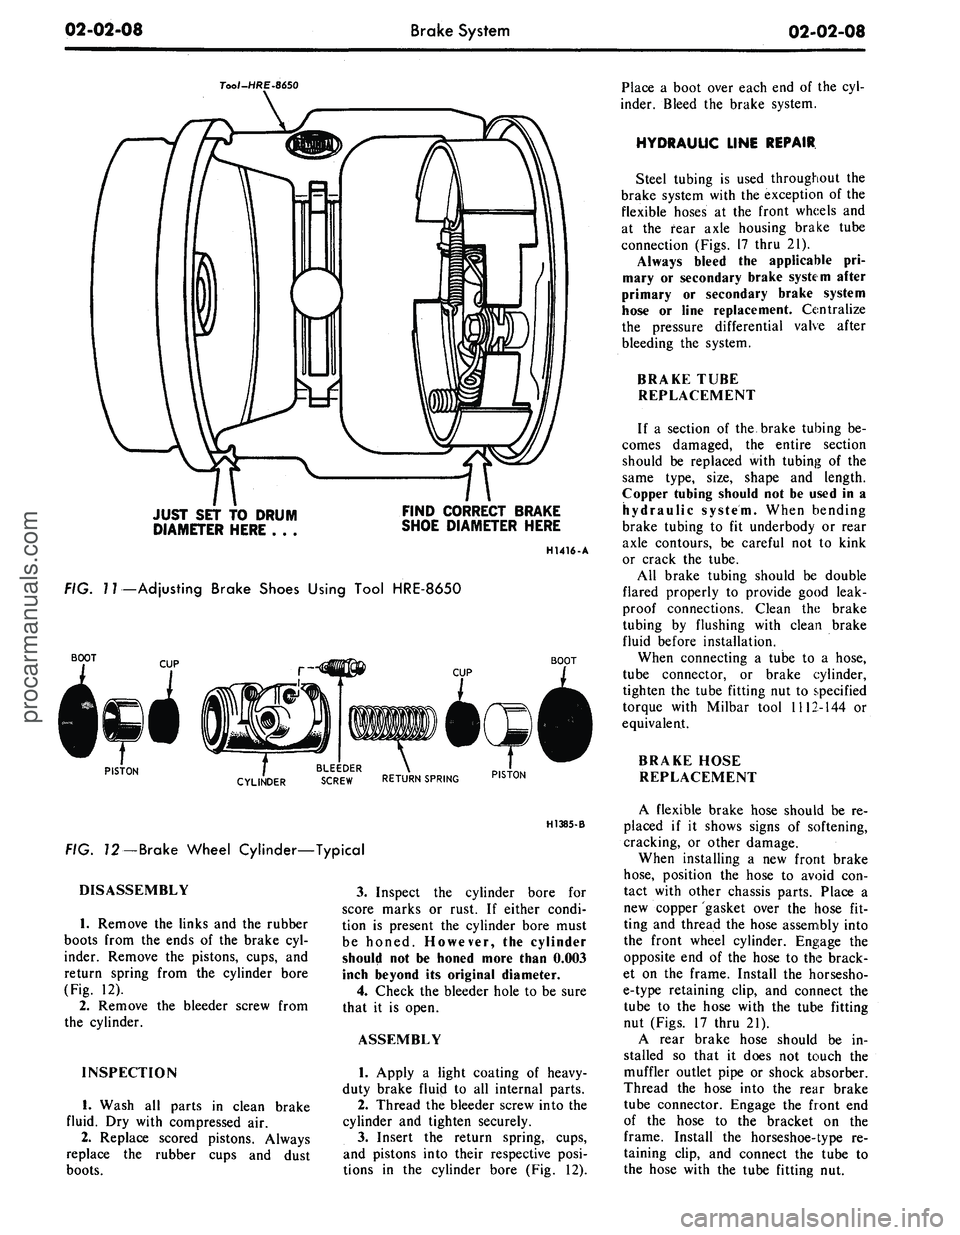 FORD MUSTANG 1969  Volume One Chassis 
02-02-08 
Brake System

02-02-08

Tool-HRE-8650

JUST SET TO DRUM

DIAMETER HERE . . . 
FIND CORRECT BRAKE

SHOE DIAMETER HERE

H1416-A

FIG.
 7
 7—Adjusting Brake Shoes Using Tool HRE-8650

BOOT

